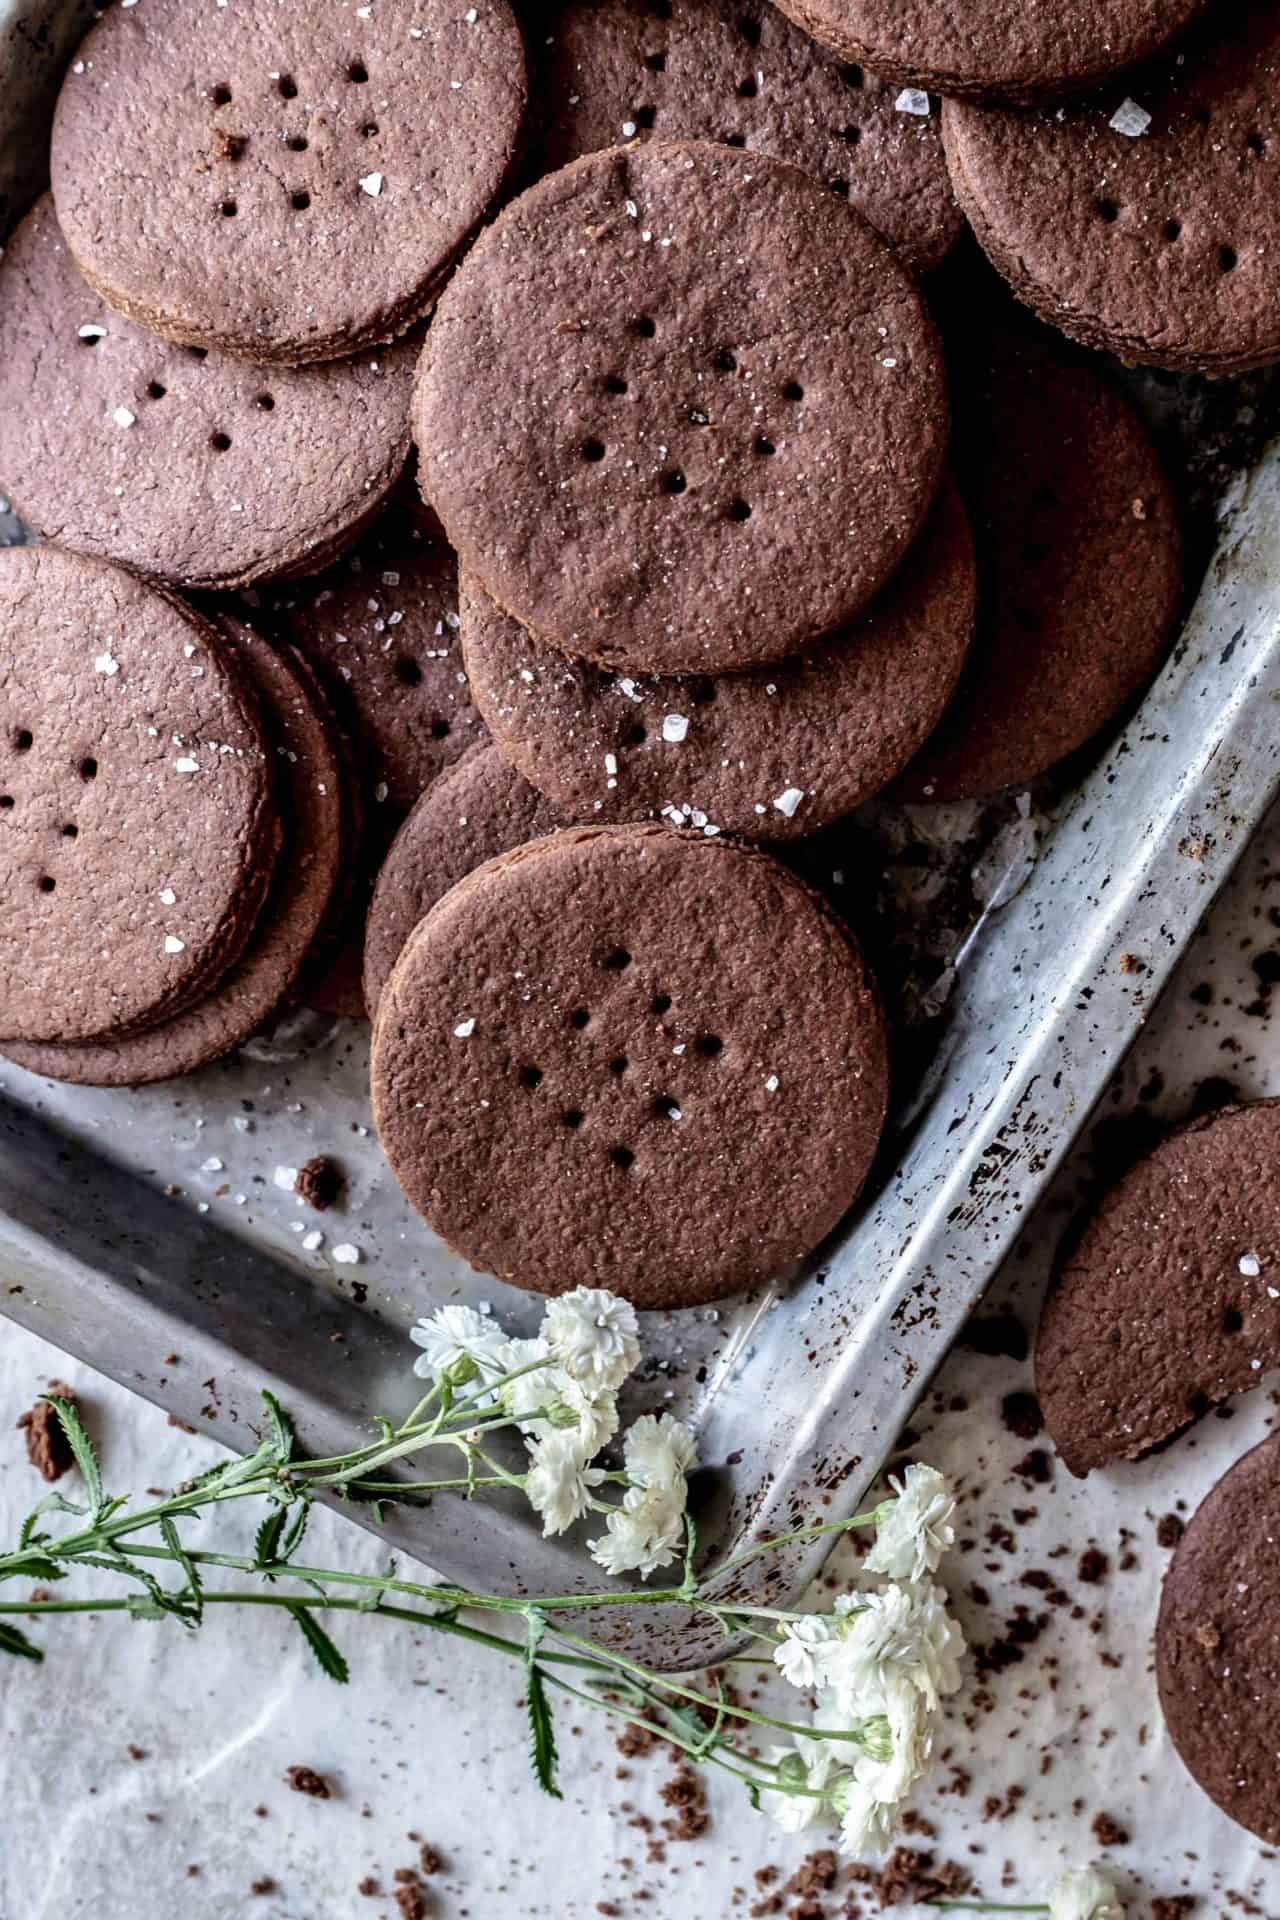 These Gluten-Free Chocolate Wafer Cookies are soft, chewy, perfectly sweetened, extra chocolaty, flavorful, buttery and so delicious!